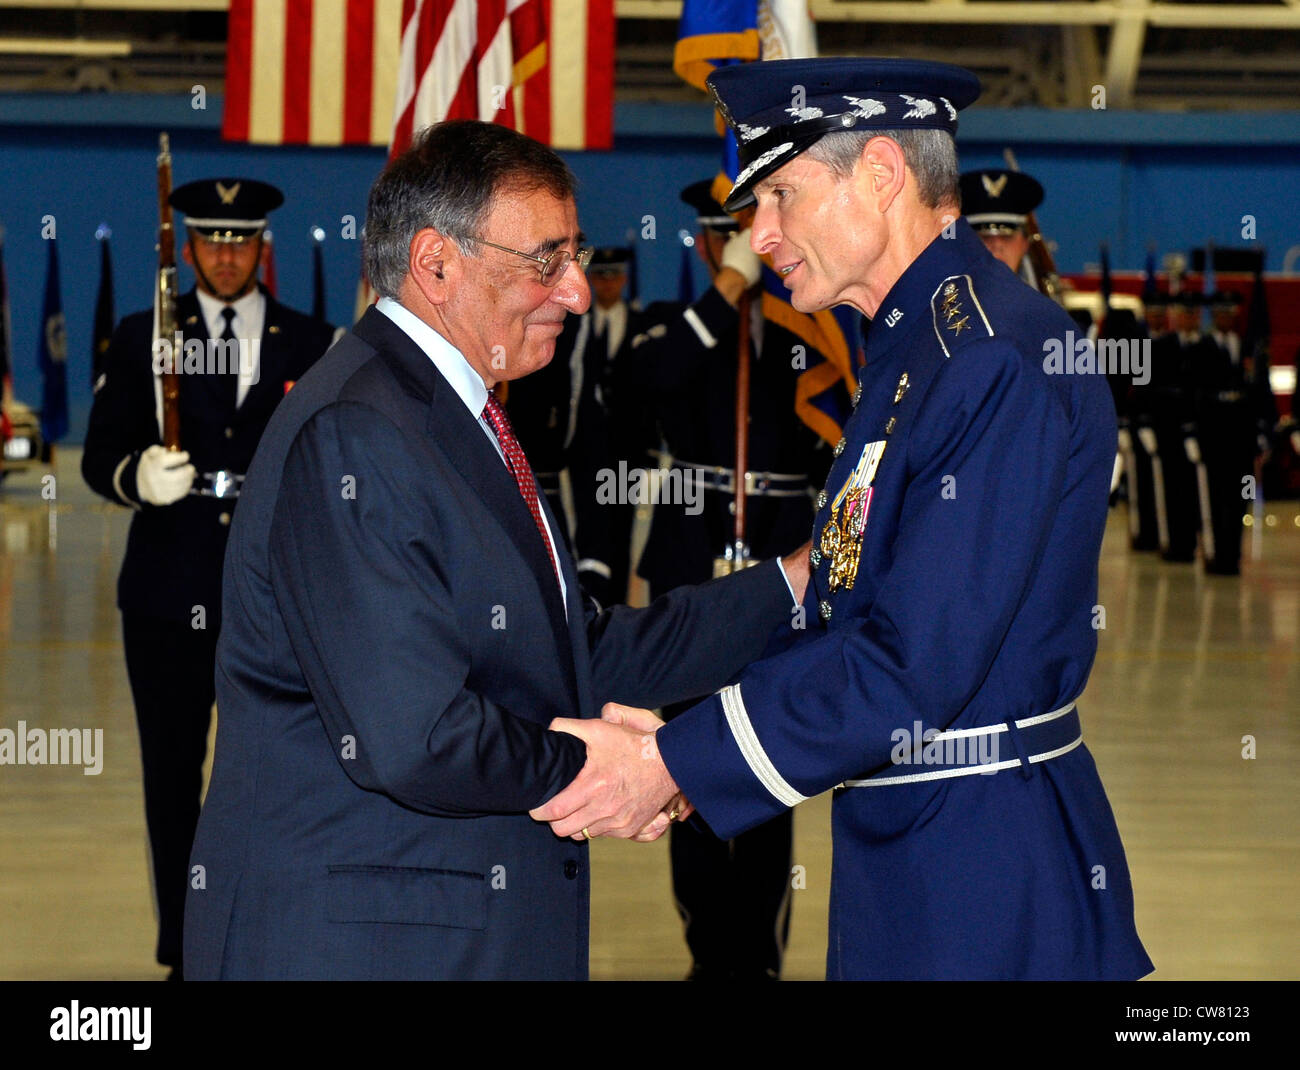 Secretary of Defense Leon Panetta congratulates Gen. Norton Schwartz on retirement during a ceremony at Joint Base Andrews, Md., on Aug. 10, 2012. Schwartz served as Air Force Chief of Staff for four years and was succeeded by Gen. Mark A. Welsh III. Welsh previously commanded U.S. Air Forces in Europe. Stock Photo